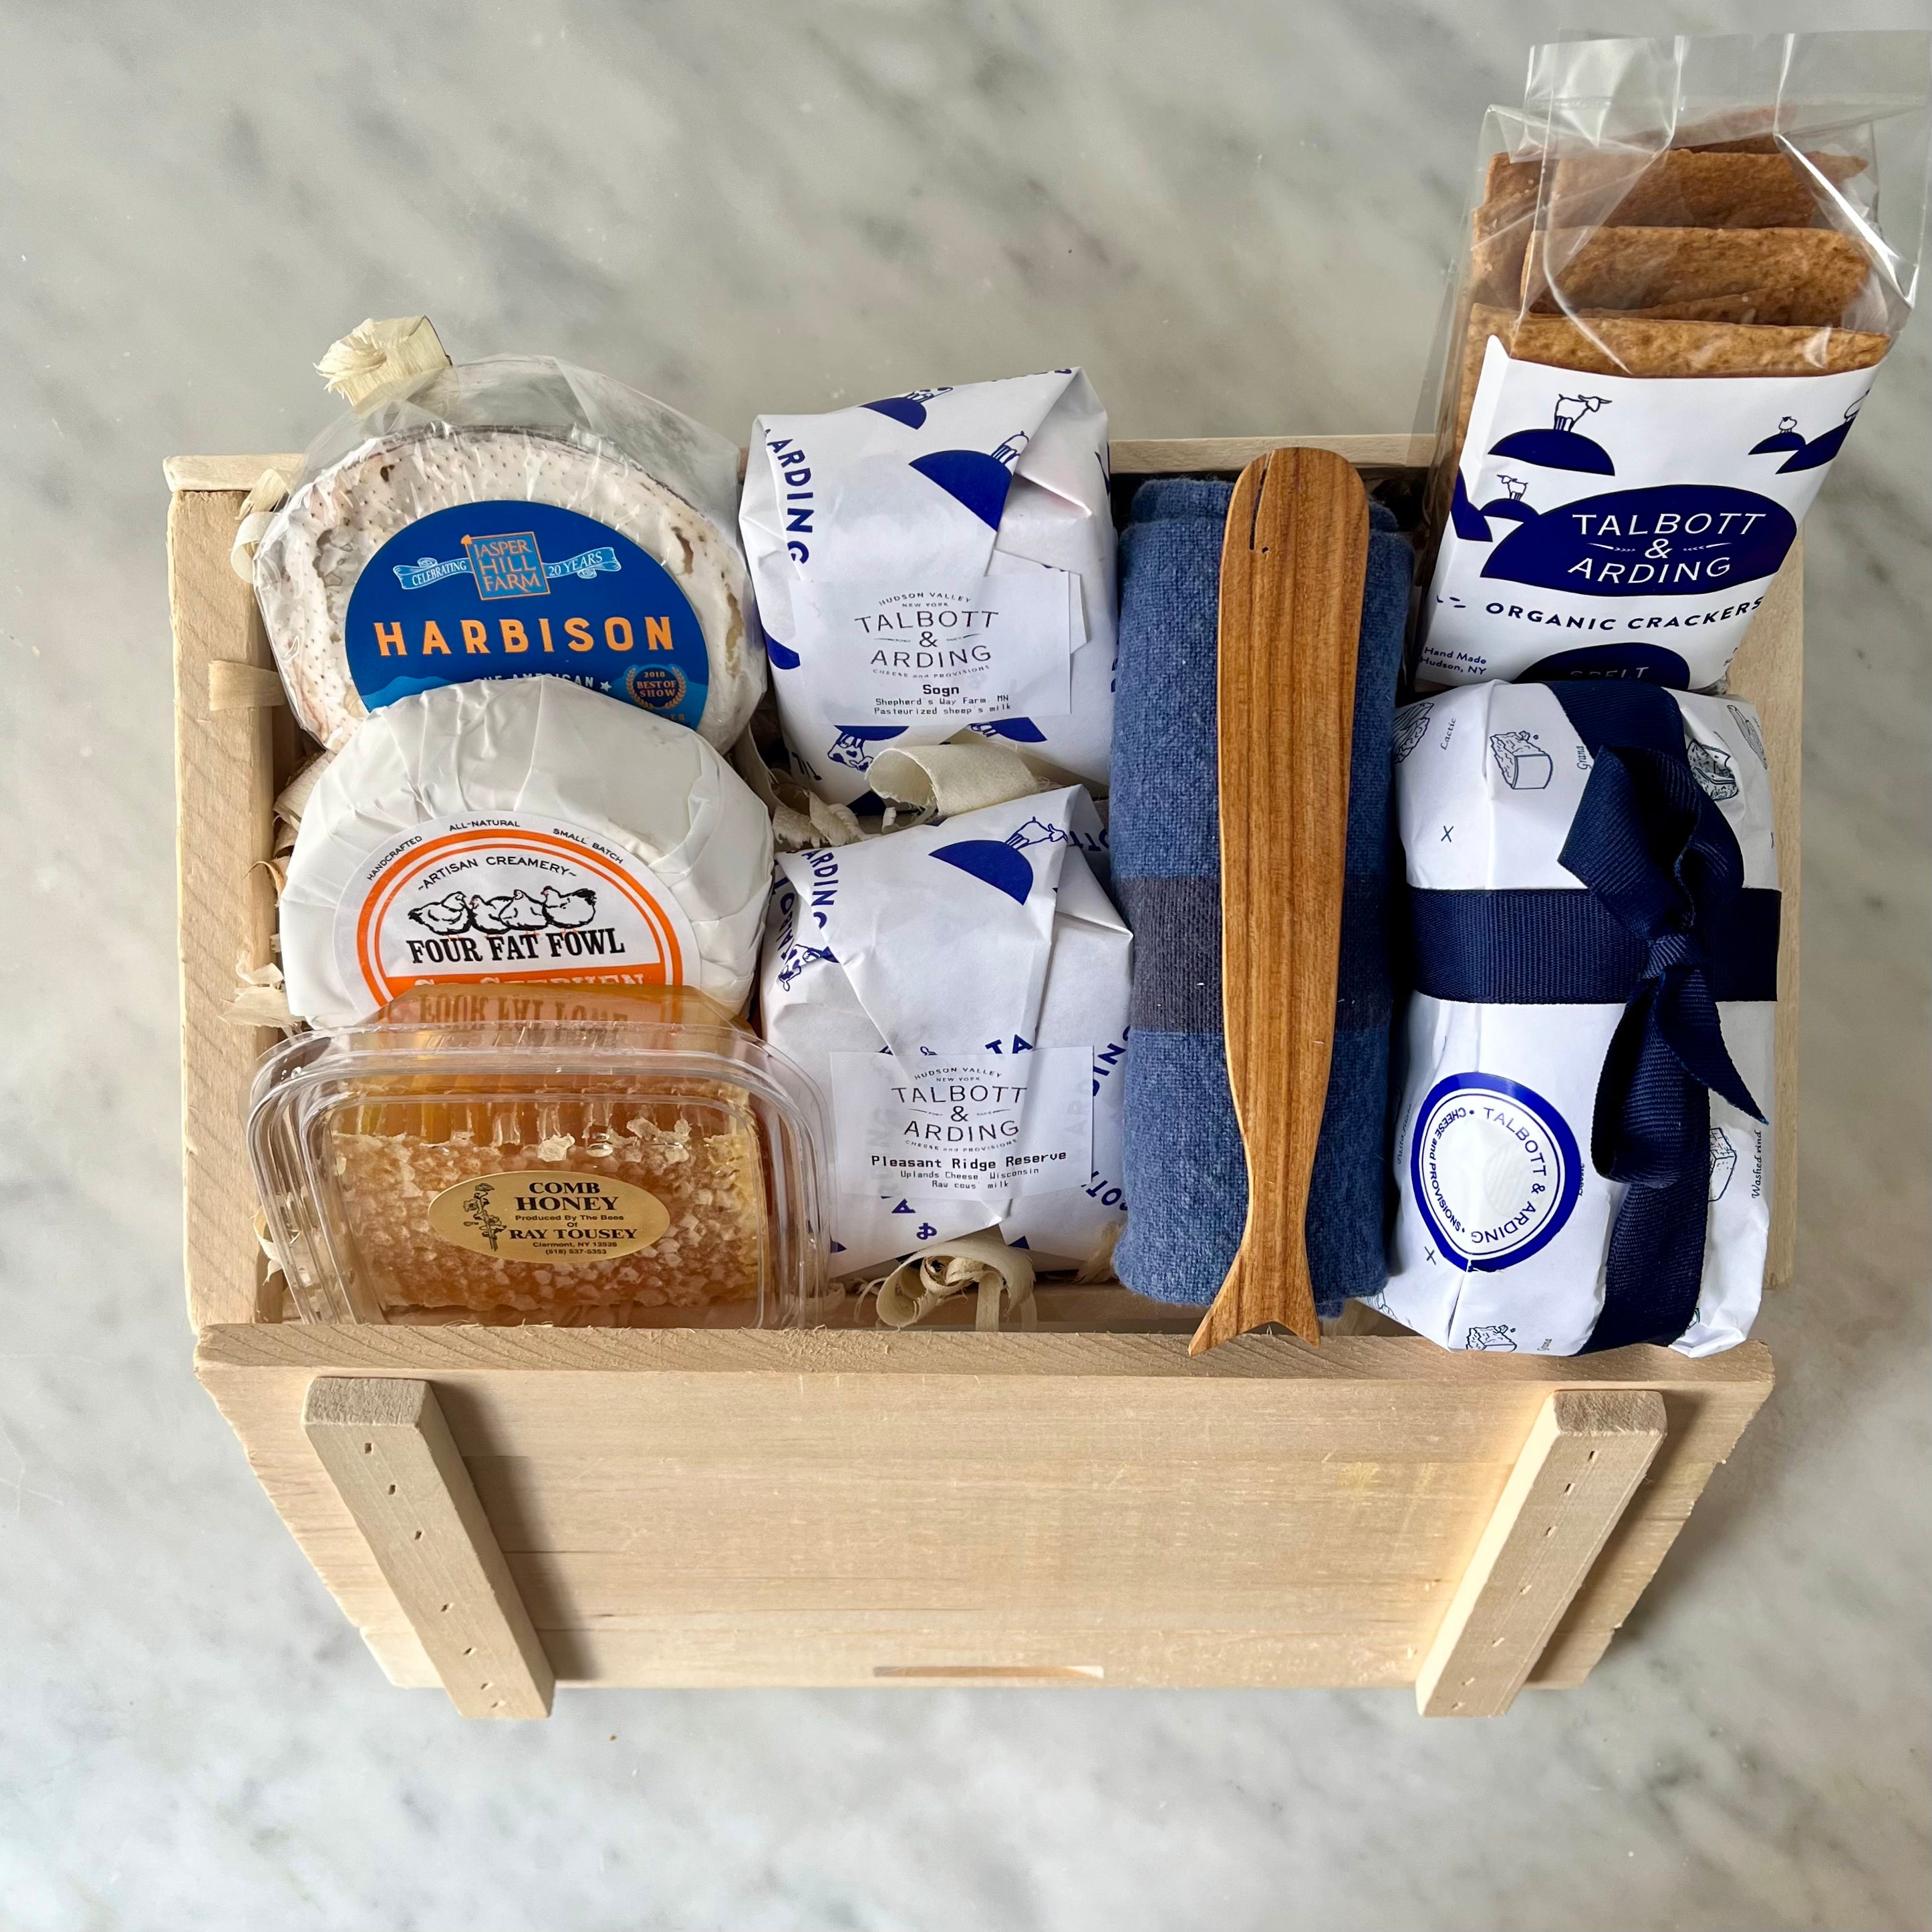 Gourmet food items in a wooden gift box.